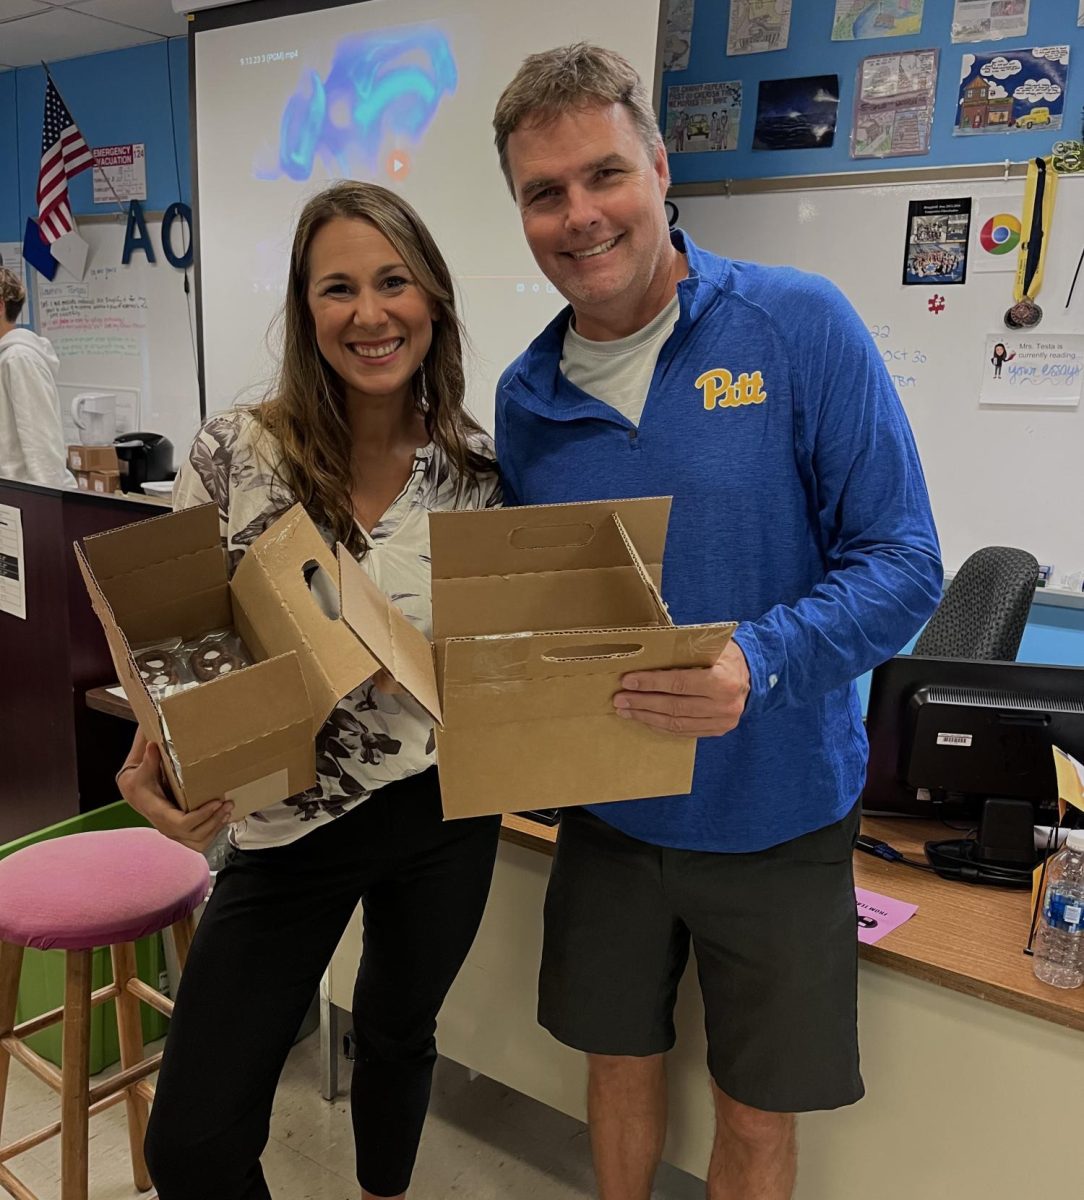 Mrs. Testa and Mr. Boyd, with boxes of chocolate grahams, ready for Hempfield students to buy!